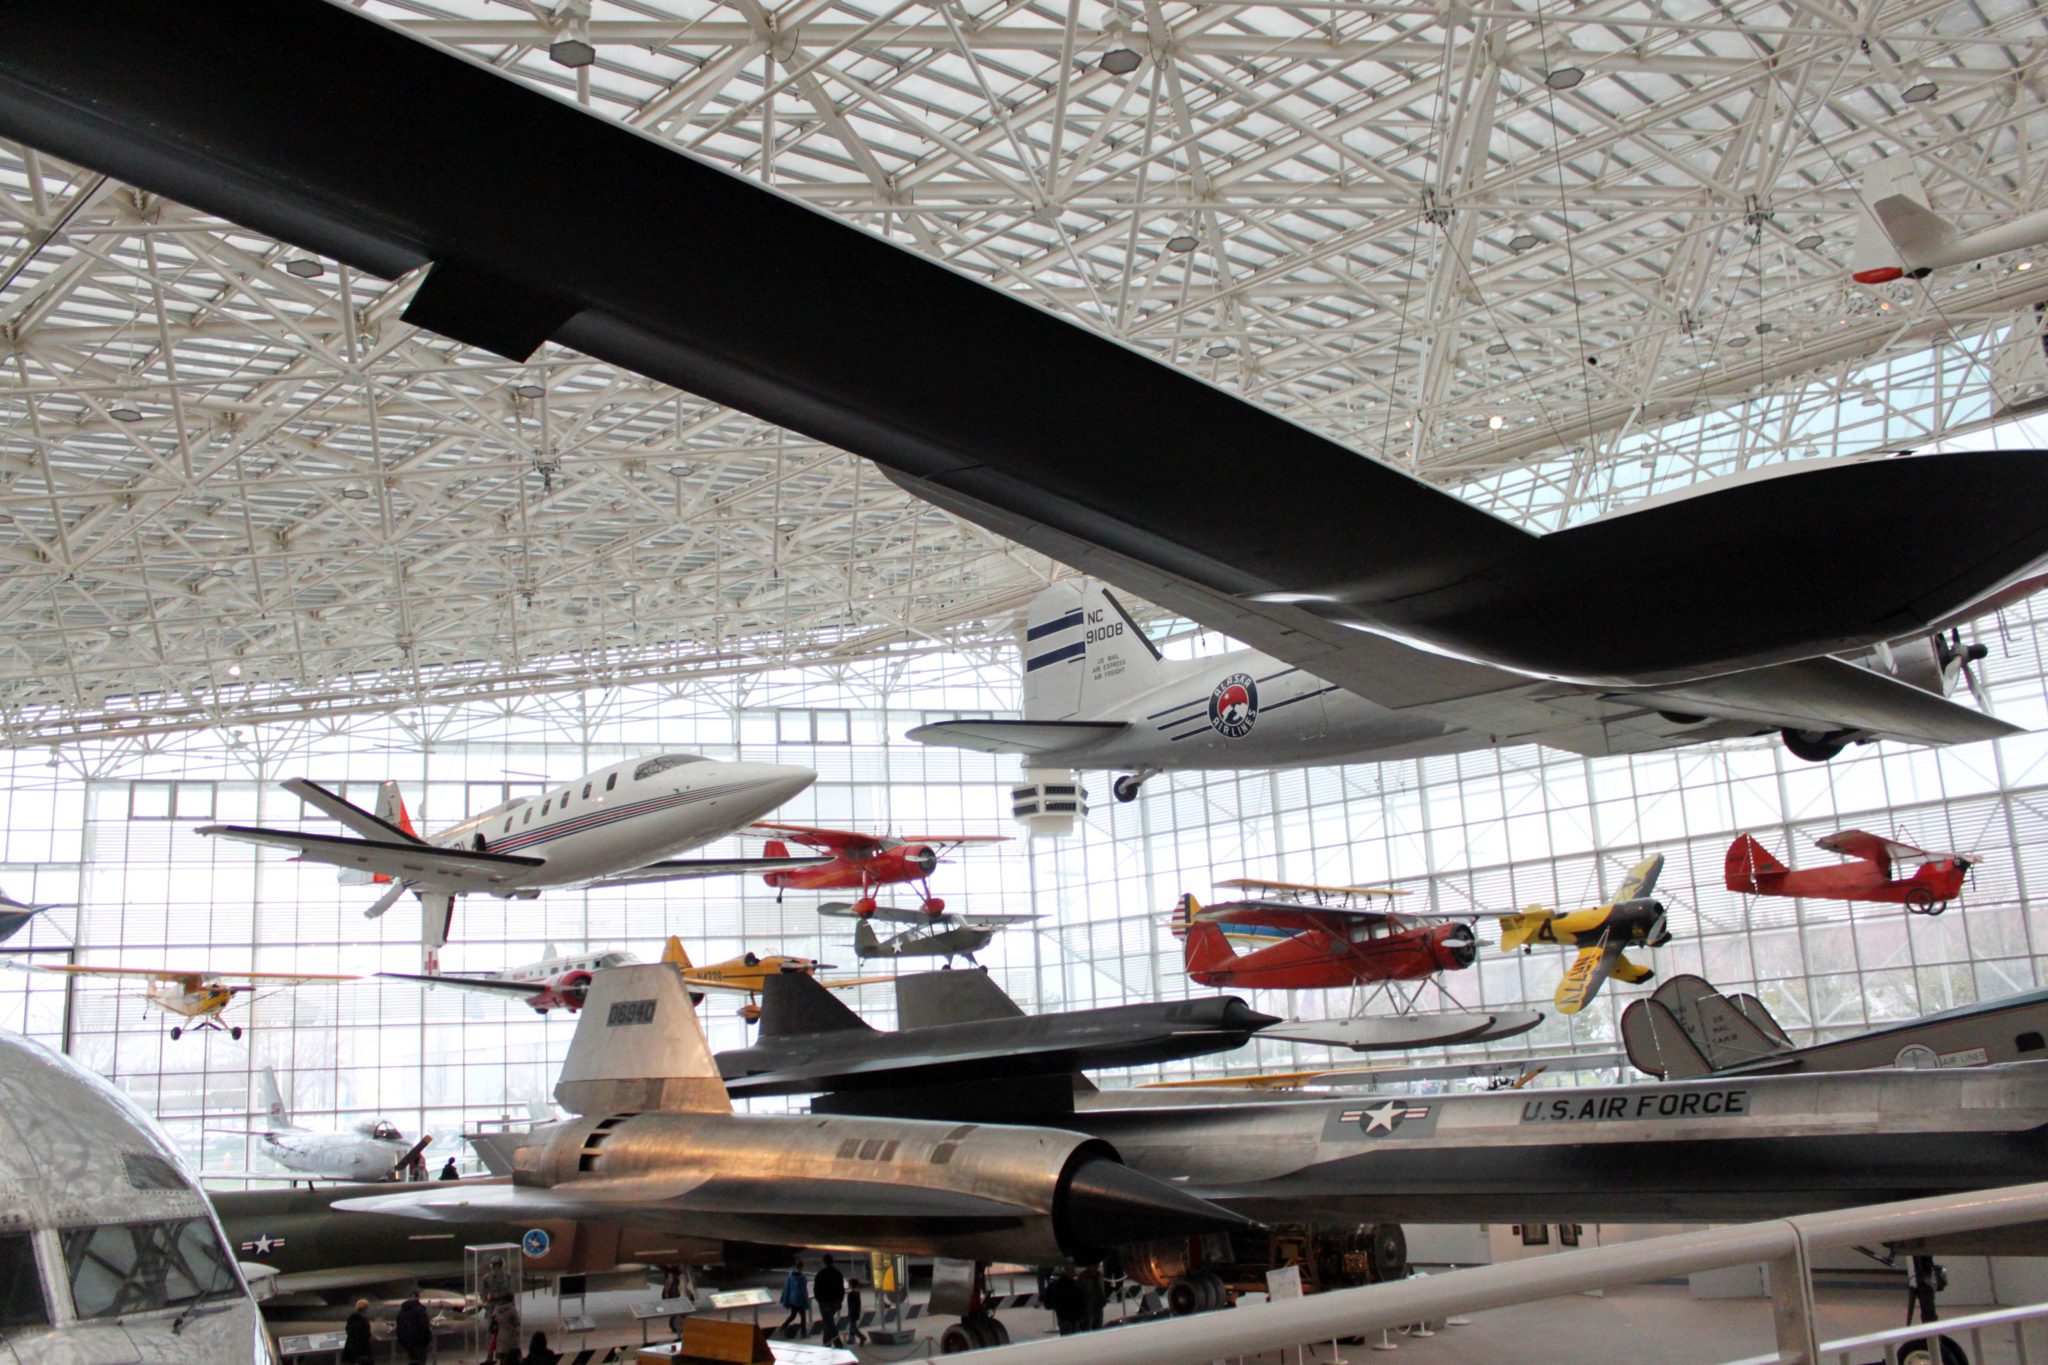 Visit the largest air and space museum in the world at Seattle's Museum of Flight- 10 things to do in Seattle with kids #Seattle #washington #museumofflight